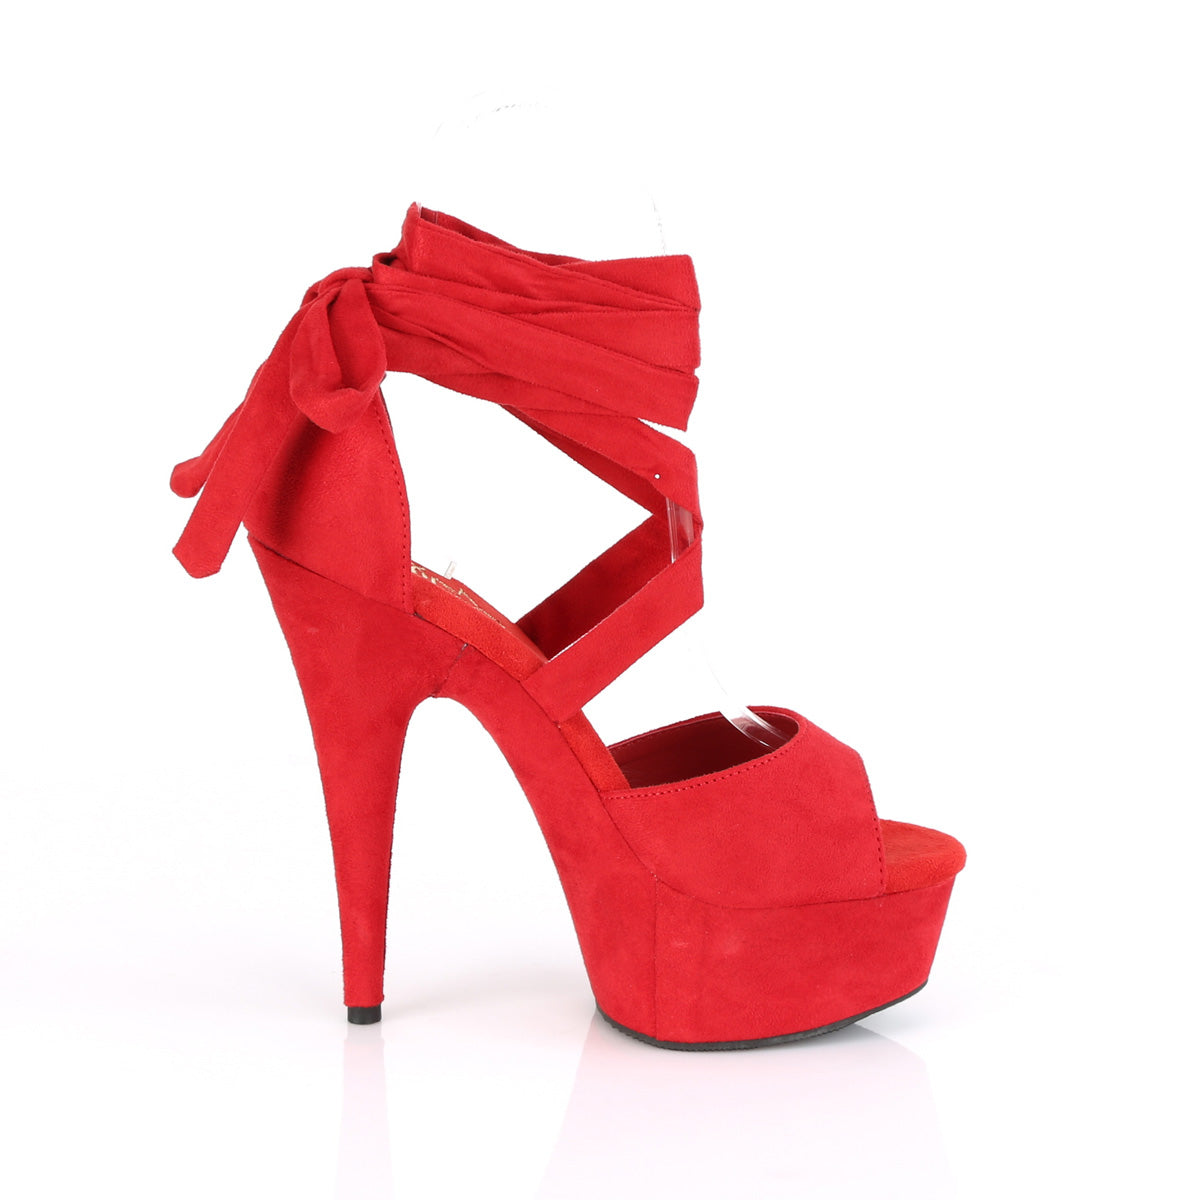 Criss Cross Ankle Wrap Sandals Red